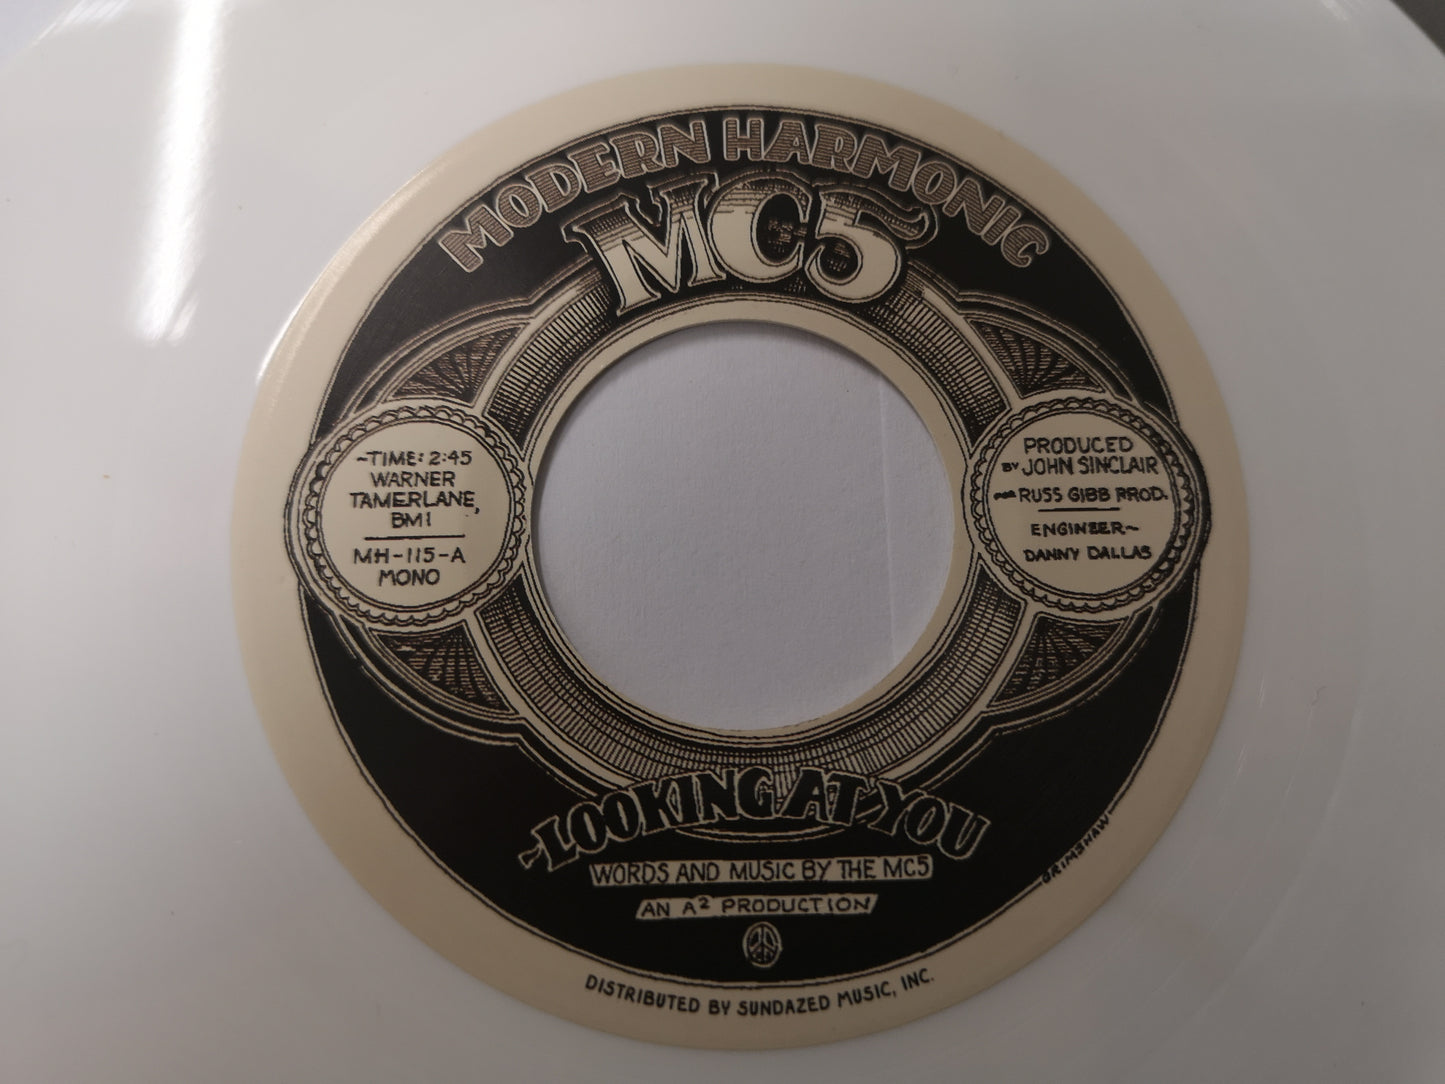 MC5 "Looking at You" Re US 2018 (1968 Tracks) New